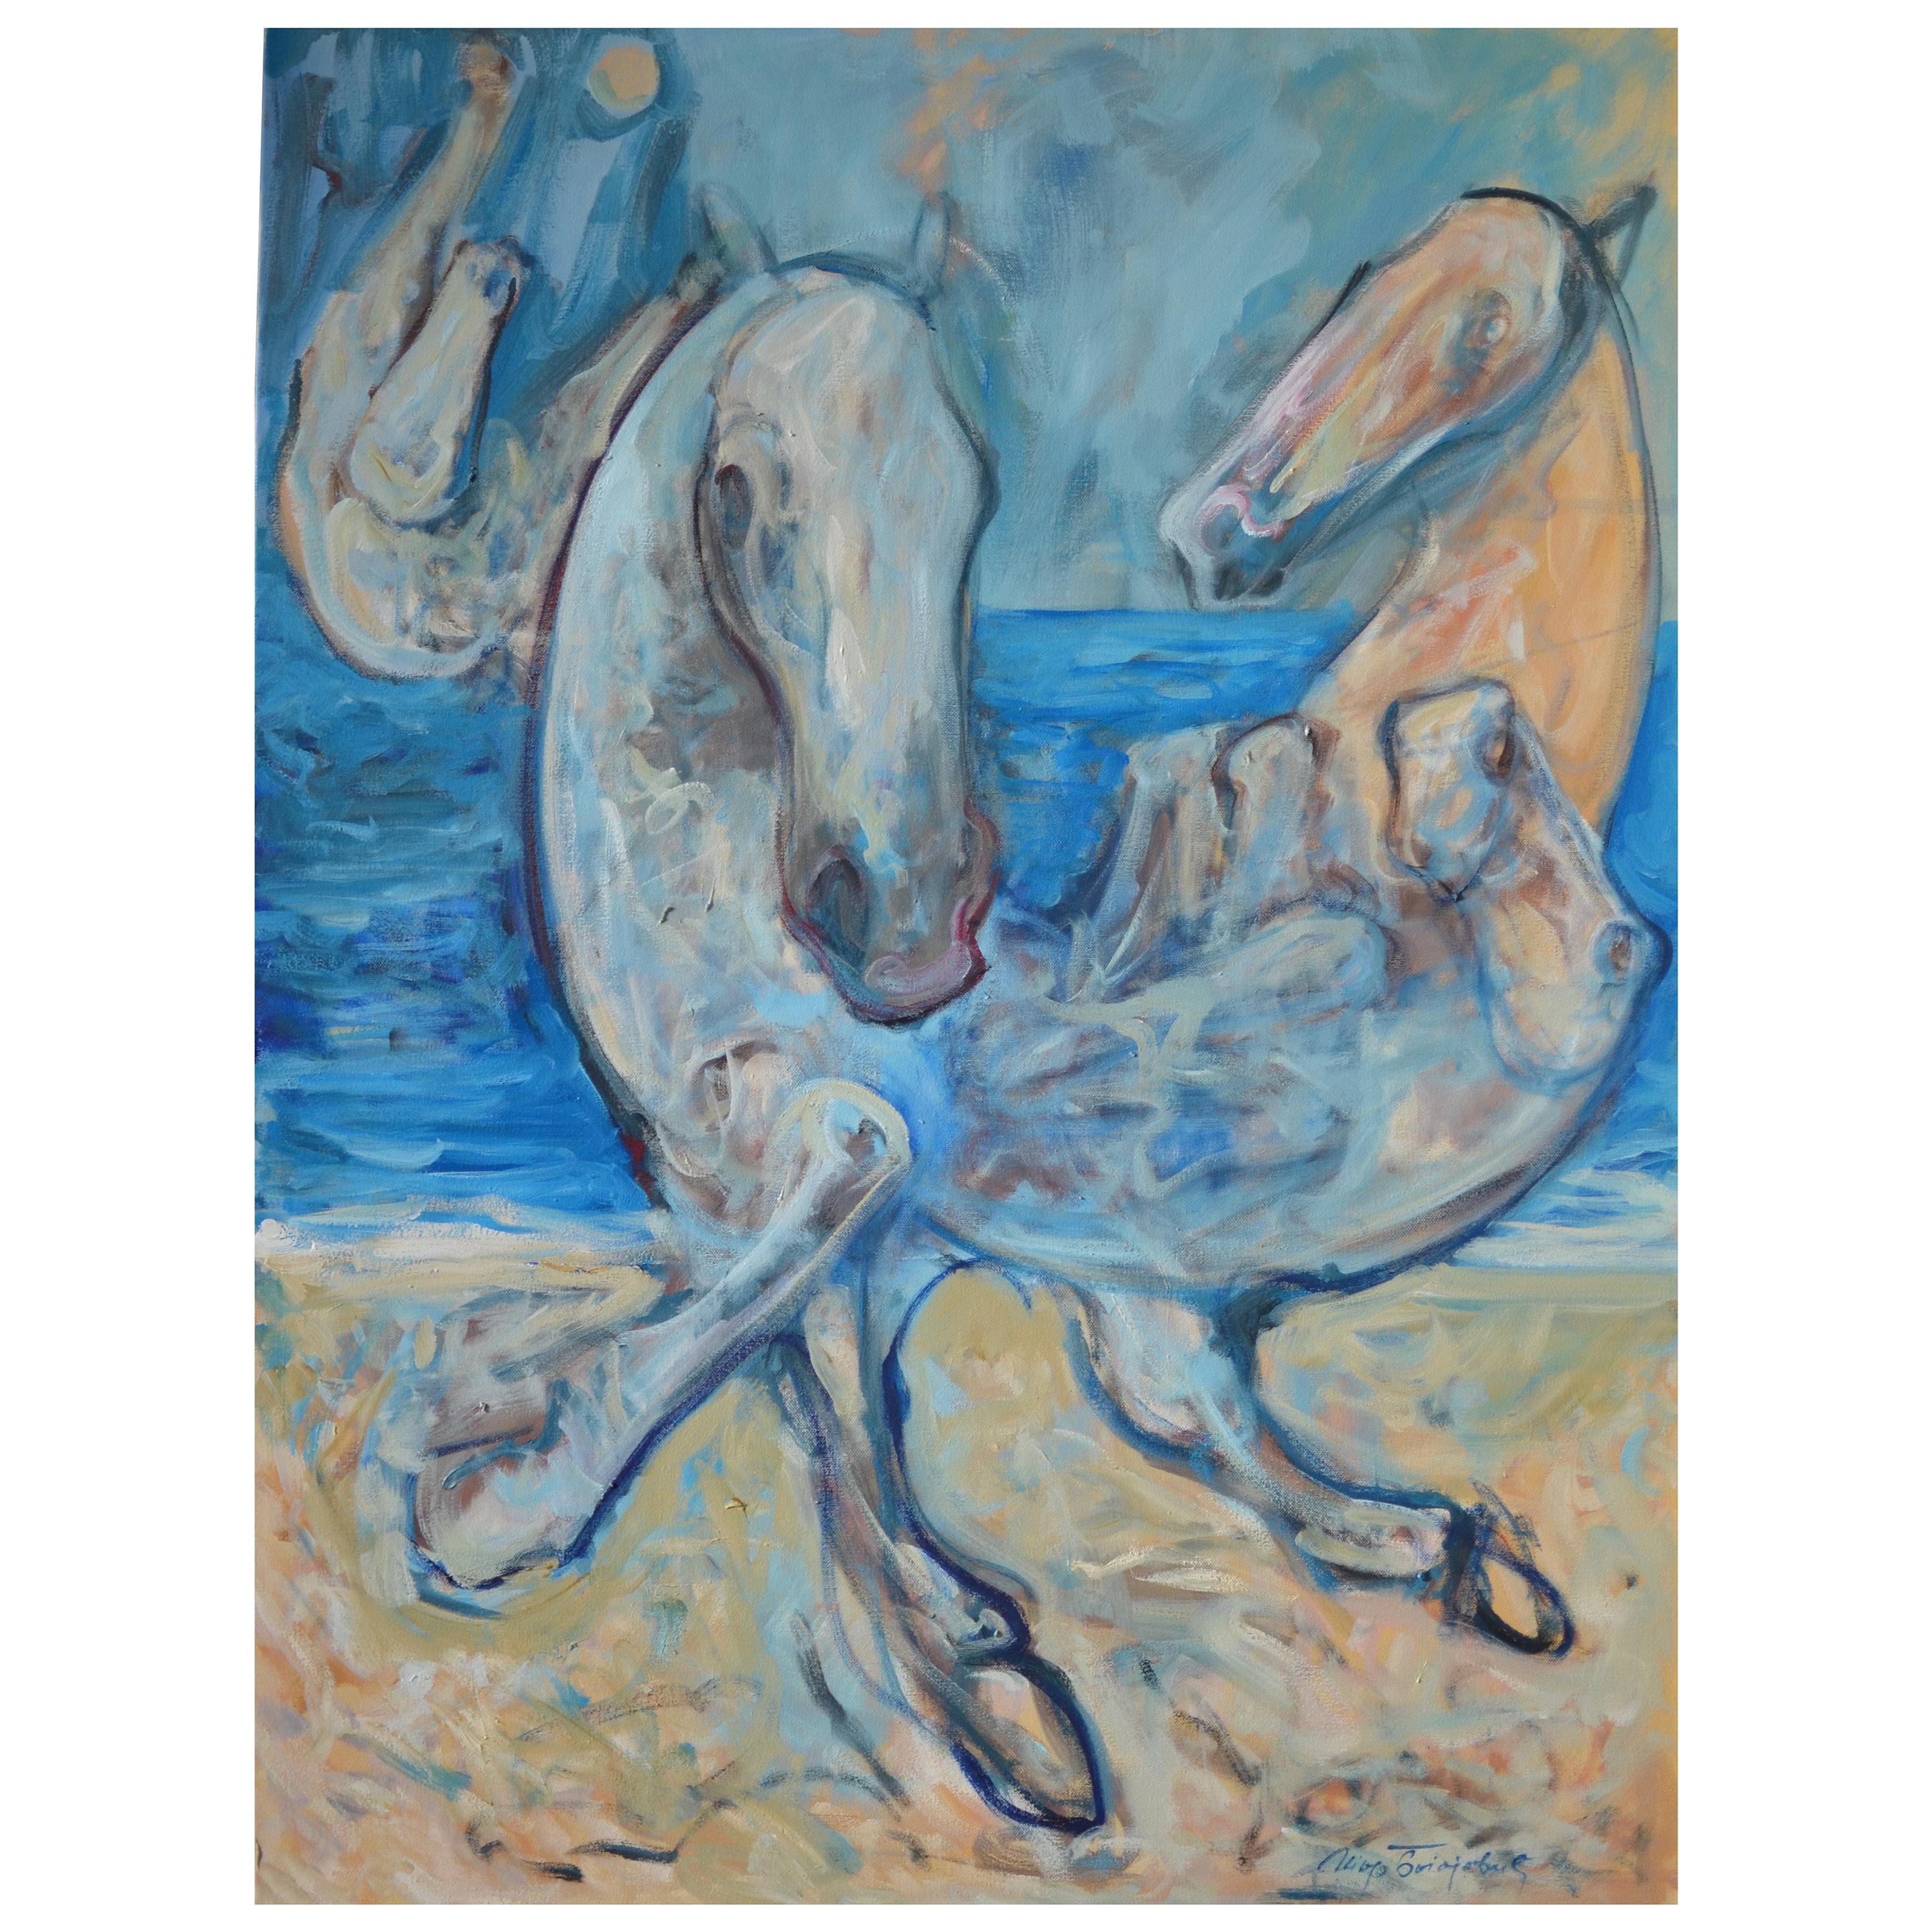 An abstract oil on canvas painting titled "On the beach" by the contemporary artist Igor Bogojevic (Montenegro born in 1980). The painting features horses, which has been Igor's signature work since the start of his career, on the beach. 

About the